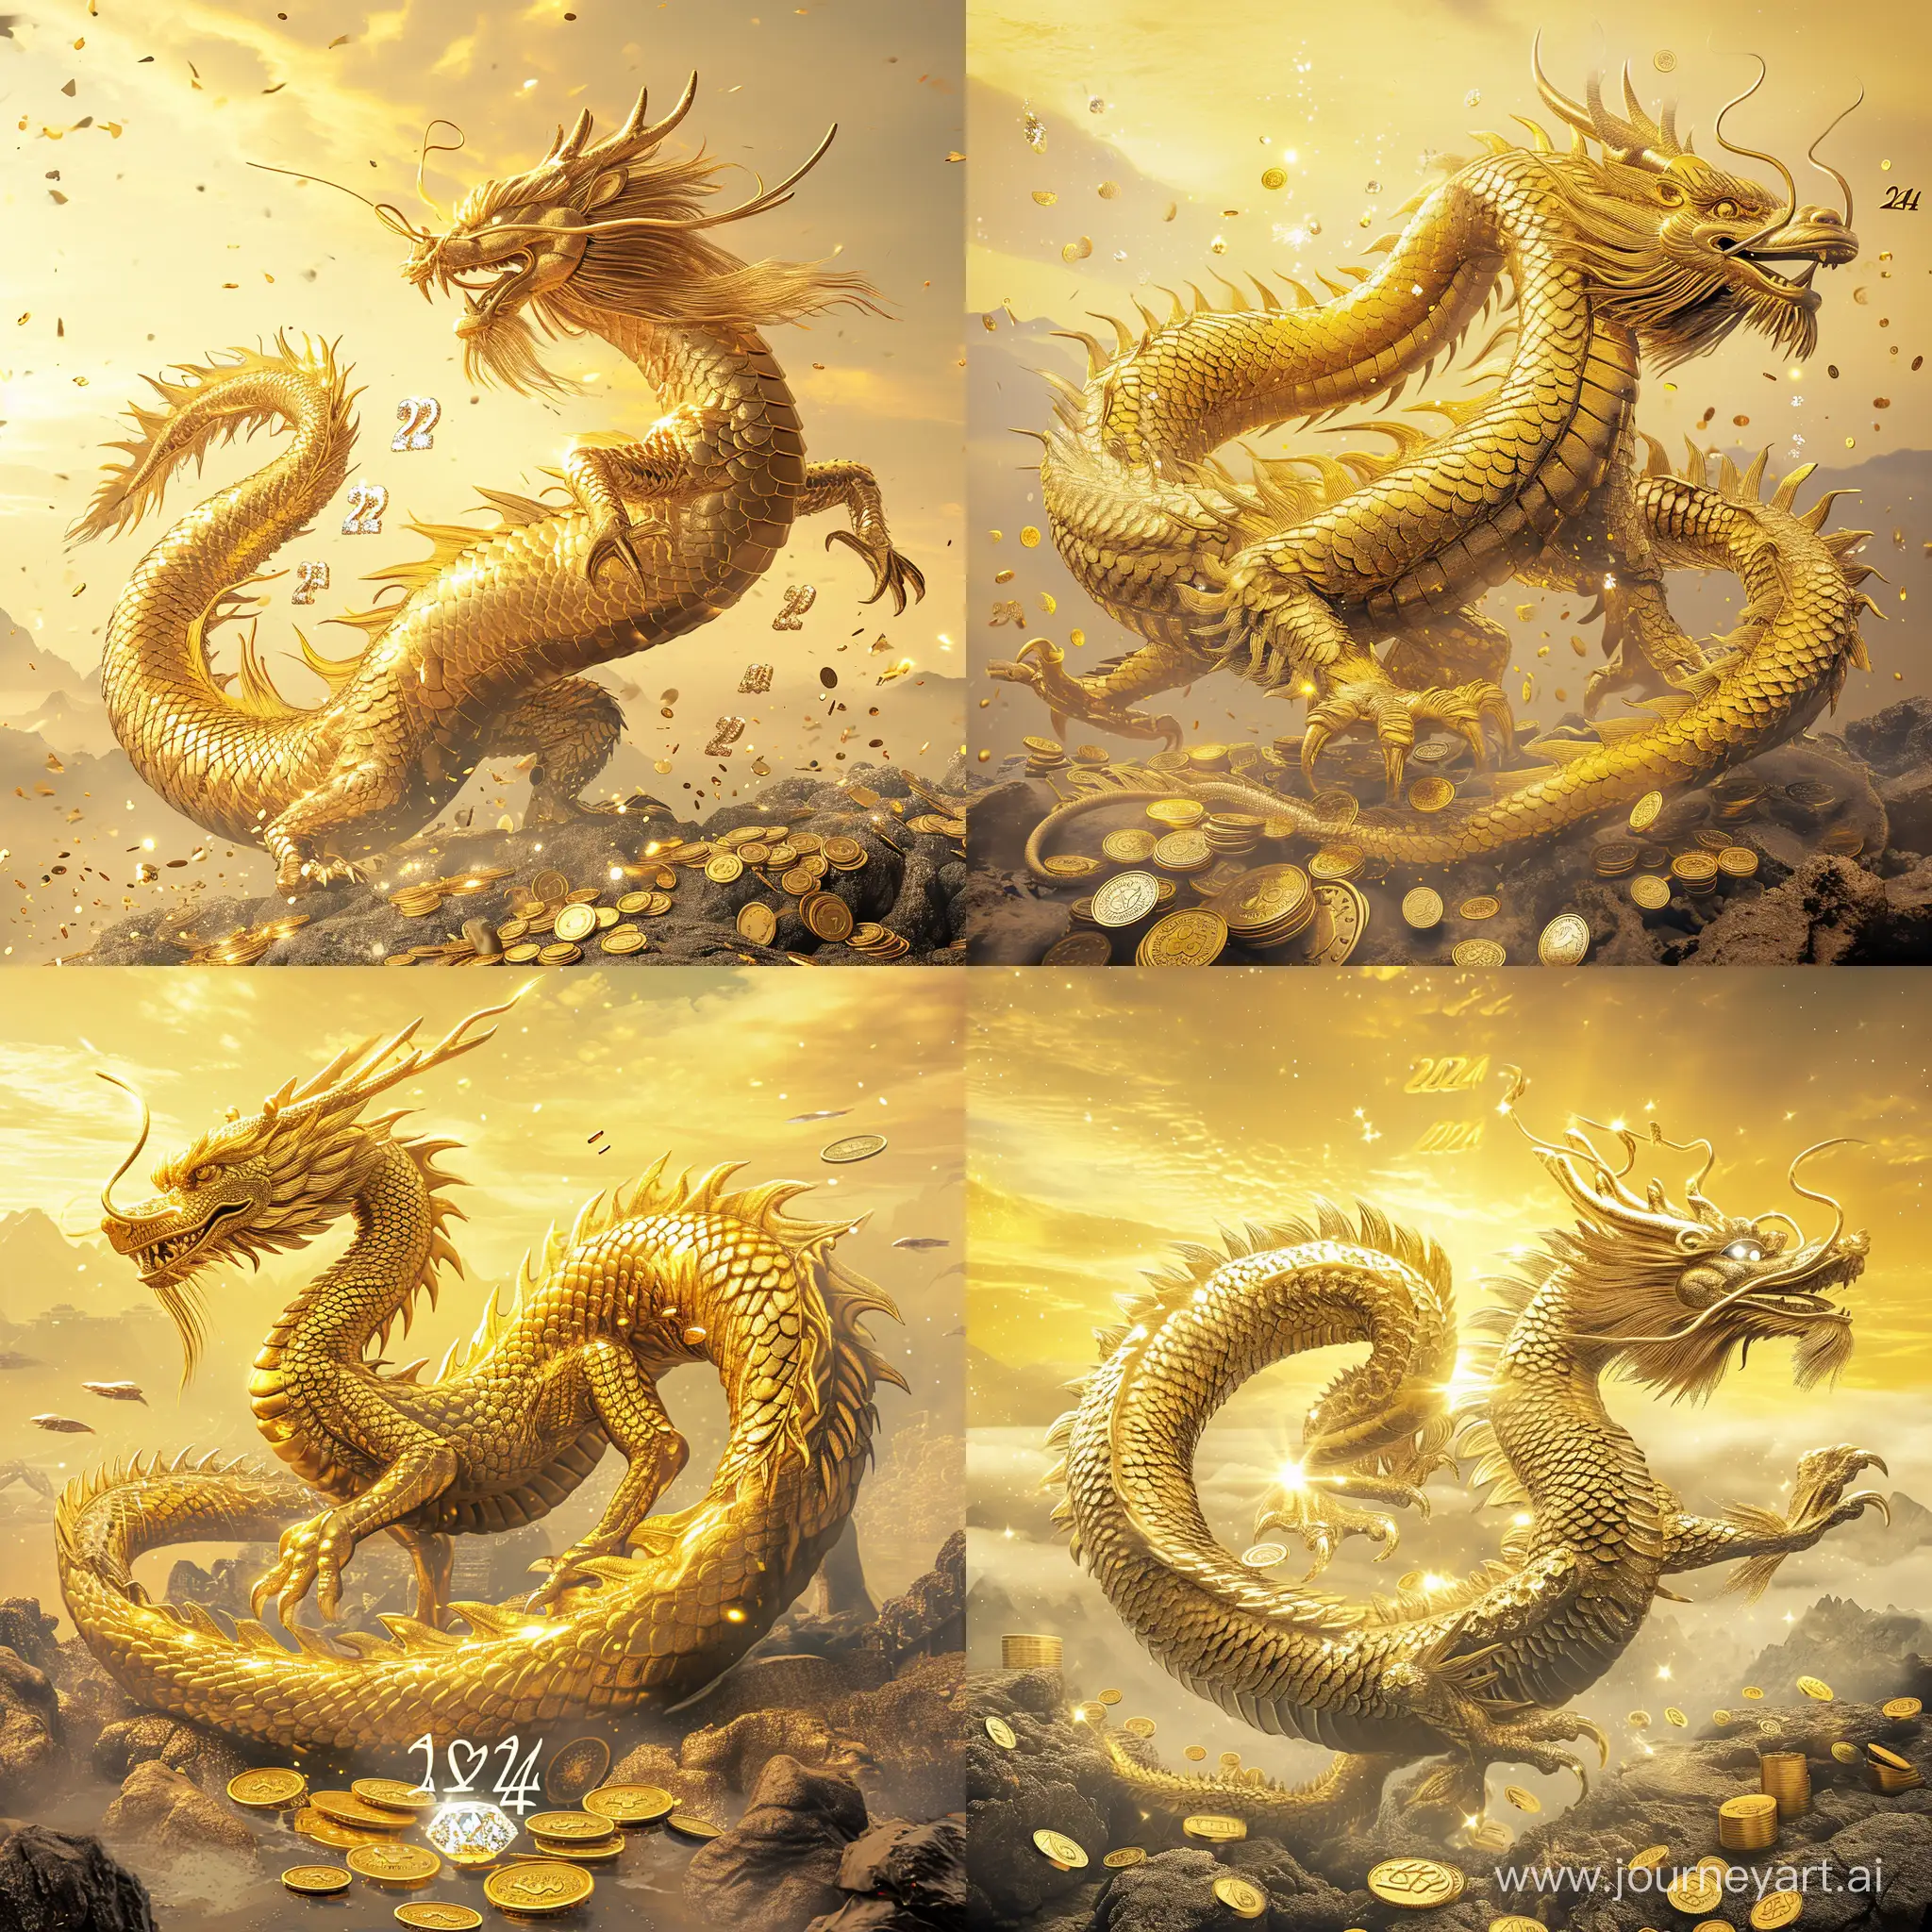 Golden-Chinese-Dragon-with-2024-Diamond-Display-under-a-Sparkling-Sky